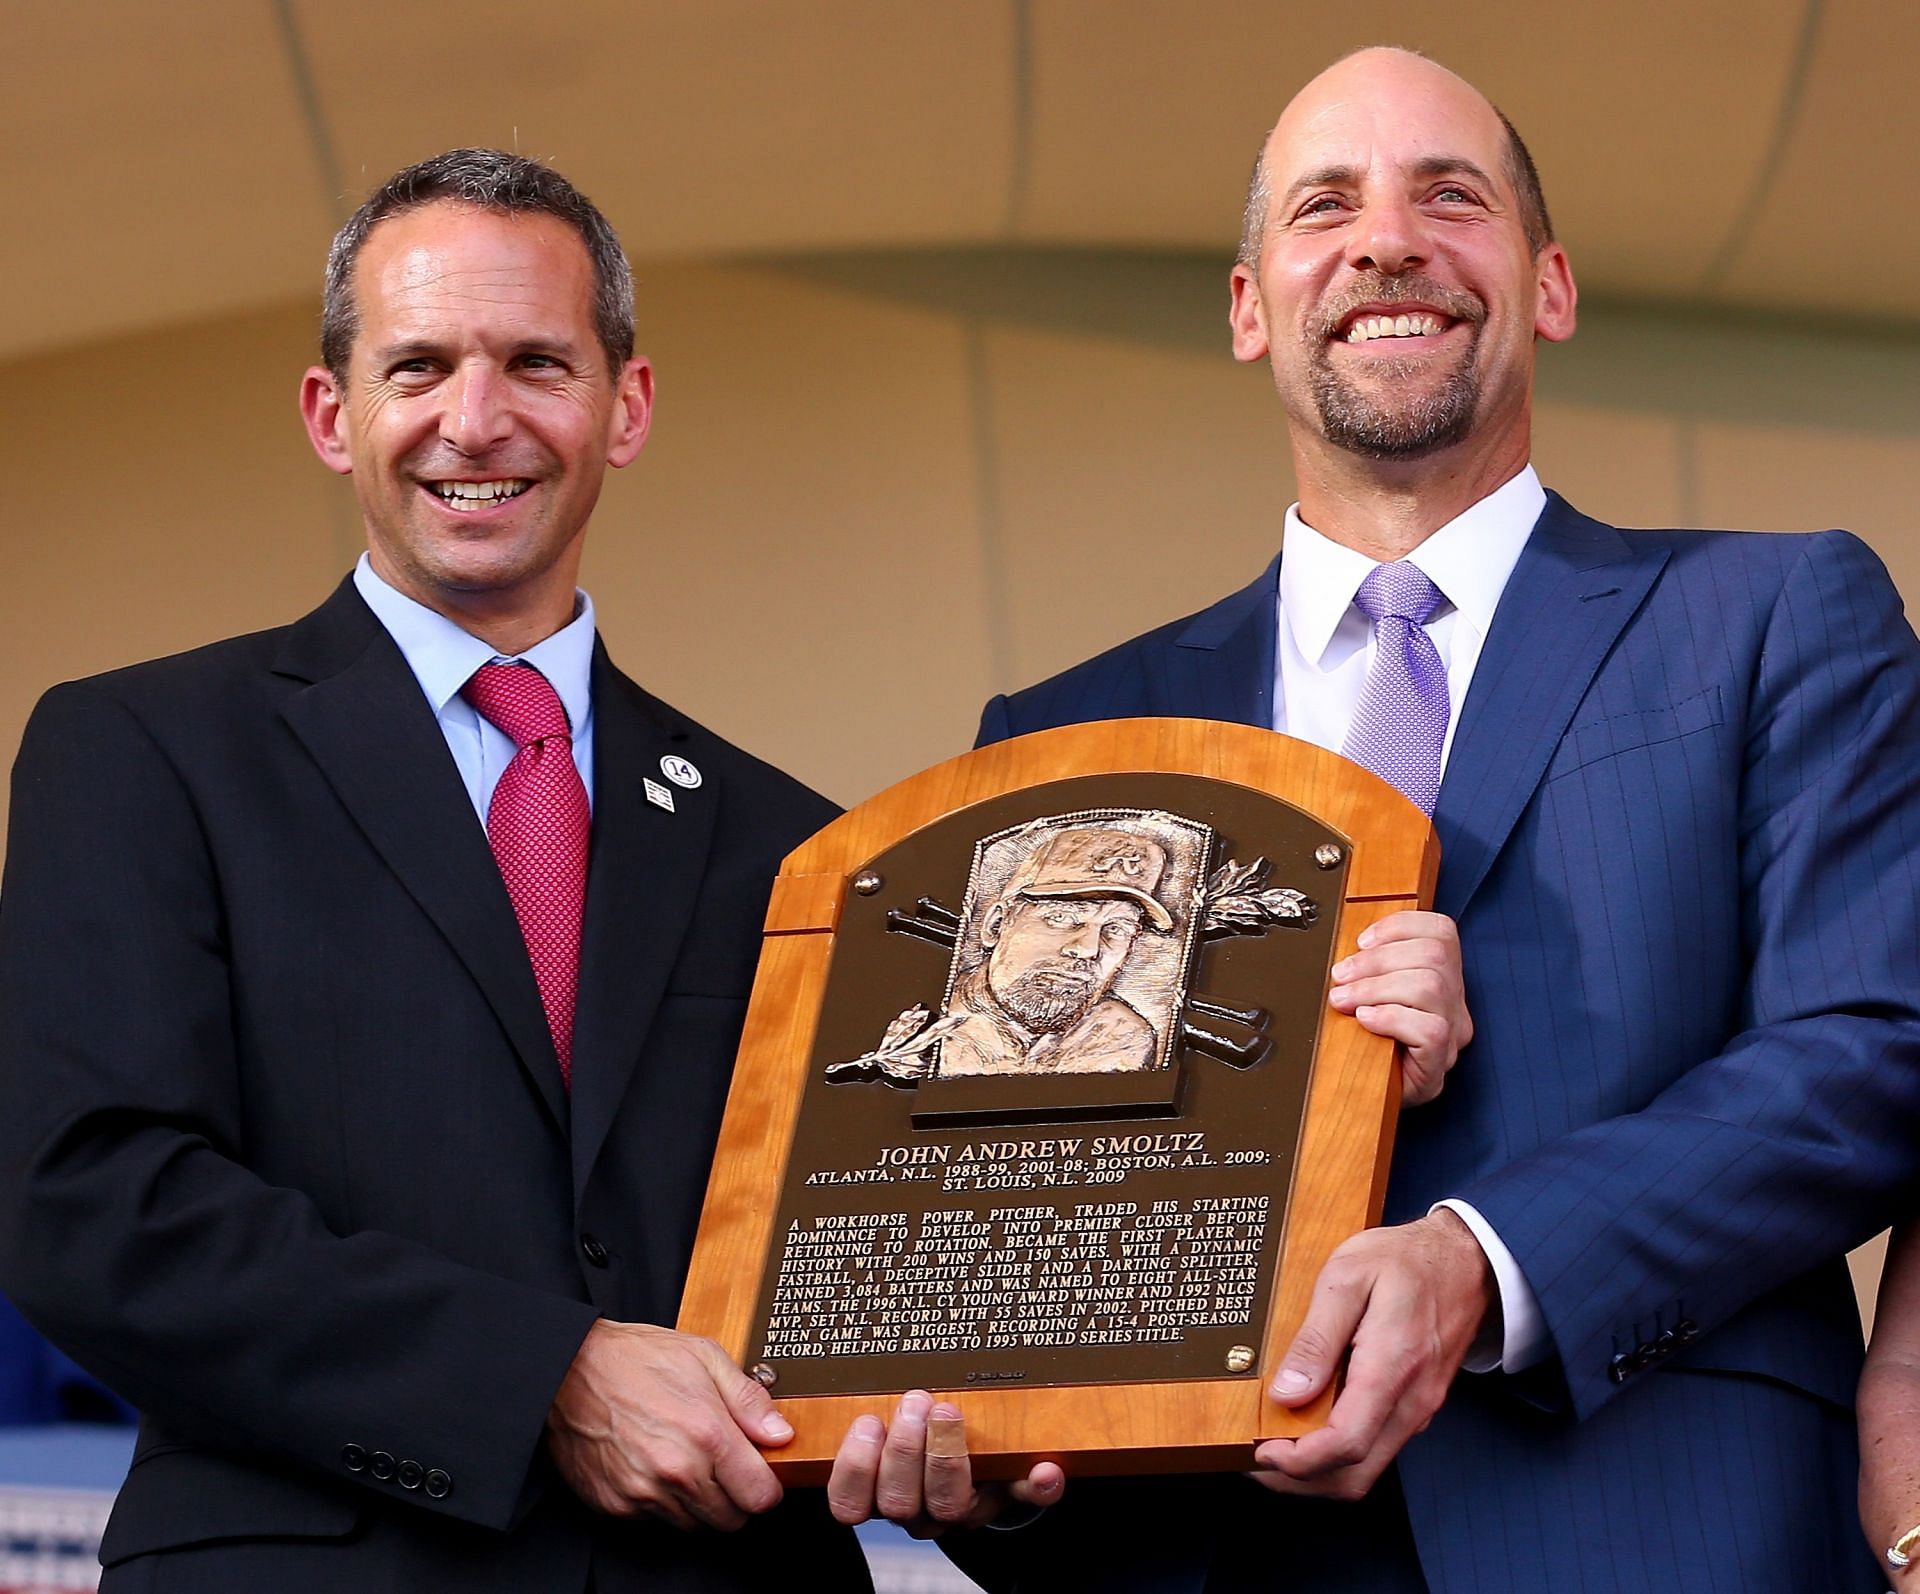 Hall of Fame President Jeff Idelson presents to John Smoltz his Hall of Fame Plaque during the Induction Ceremony at National Baseball Hall of Fame on July 26, 2015 in Cooperstown, New York. Smoltz, along with Pedro Martinez,Craig Biggio and Randy Johnson were inducted into the Baseball Hall of Fame. (Photo by Elsa/Getty Images)